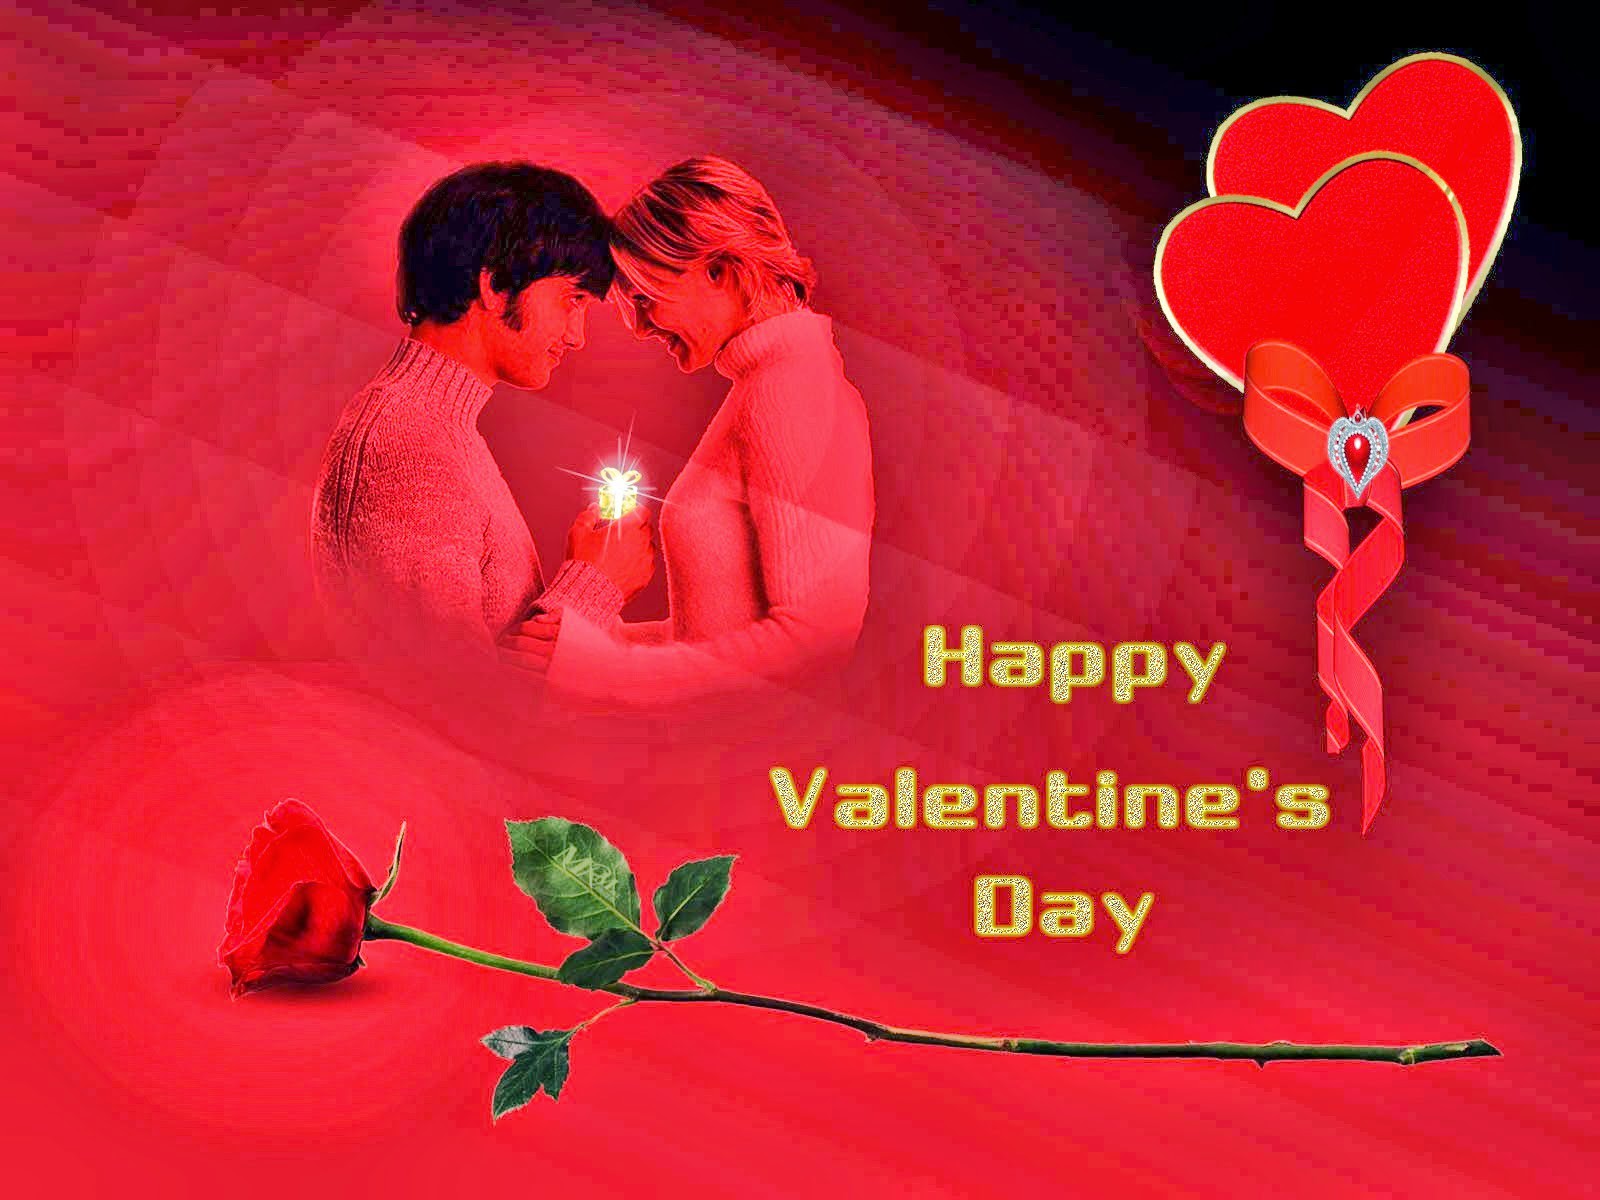 Happy Valentines Day Red Free Awesome Image For Mobile